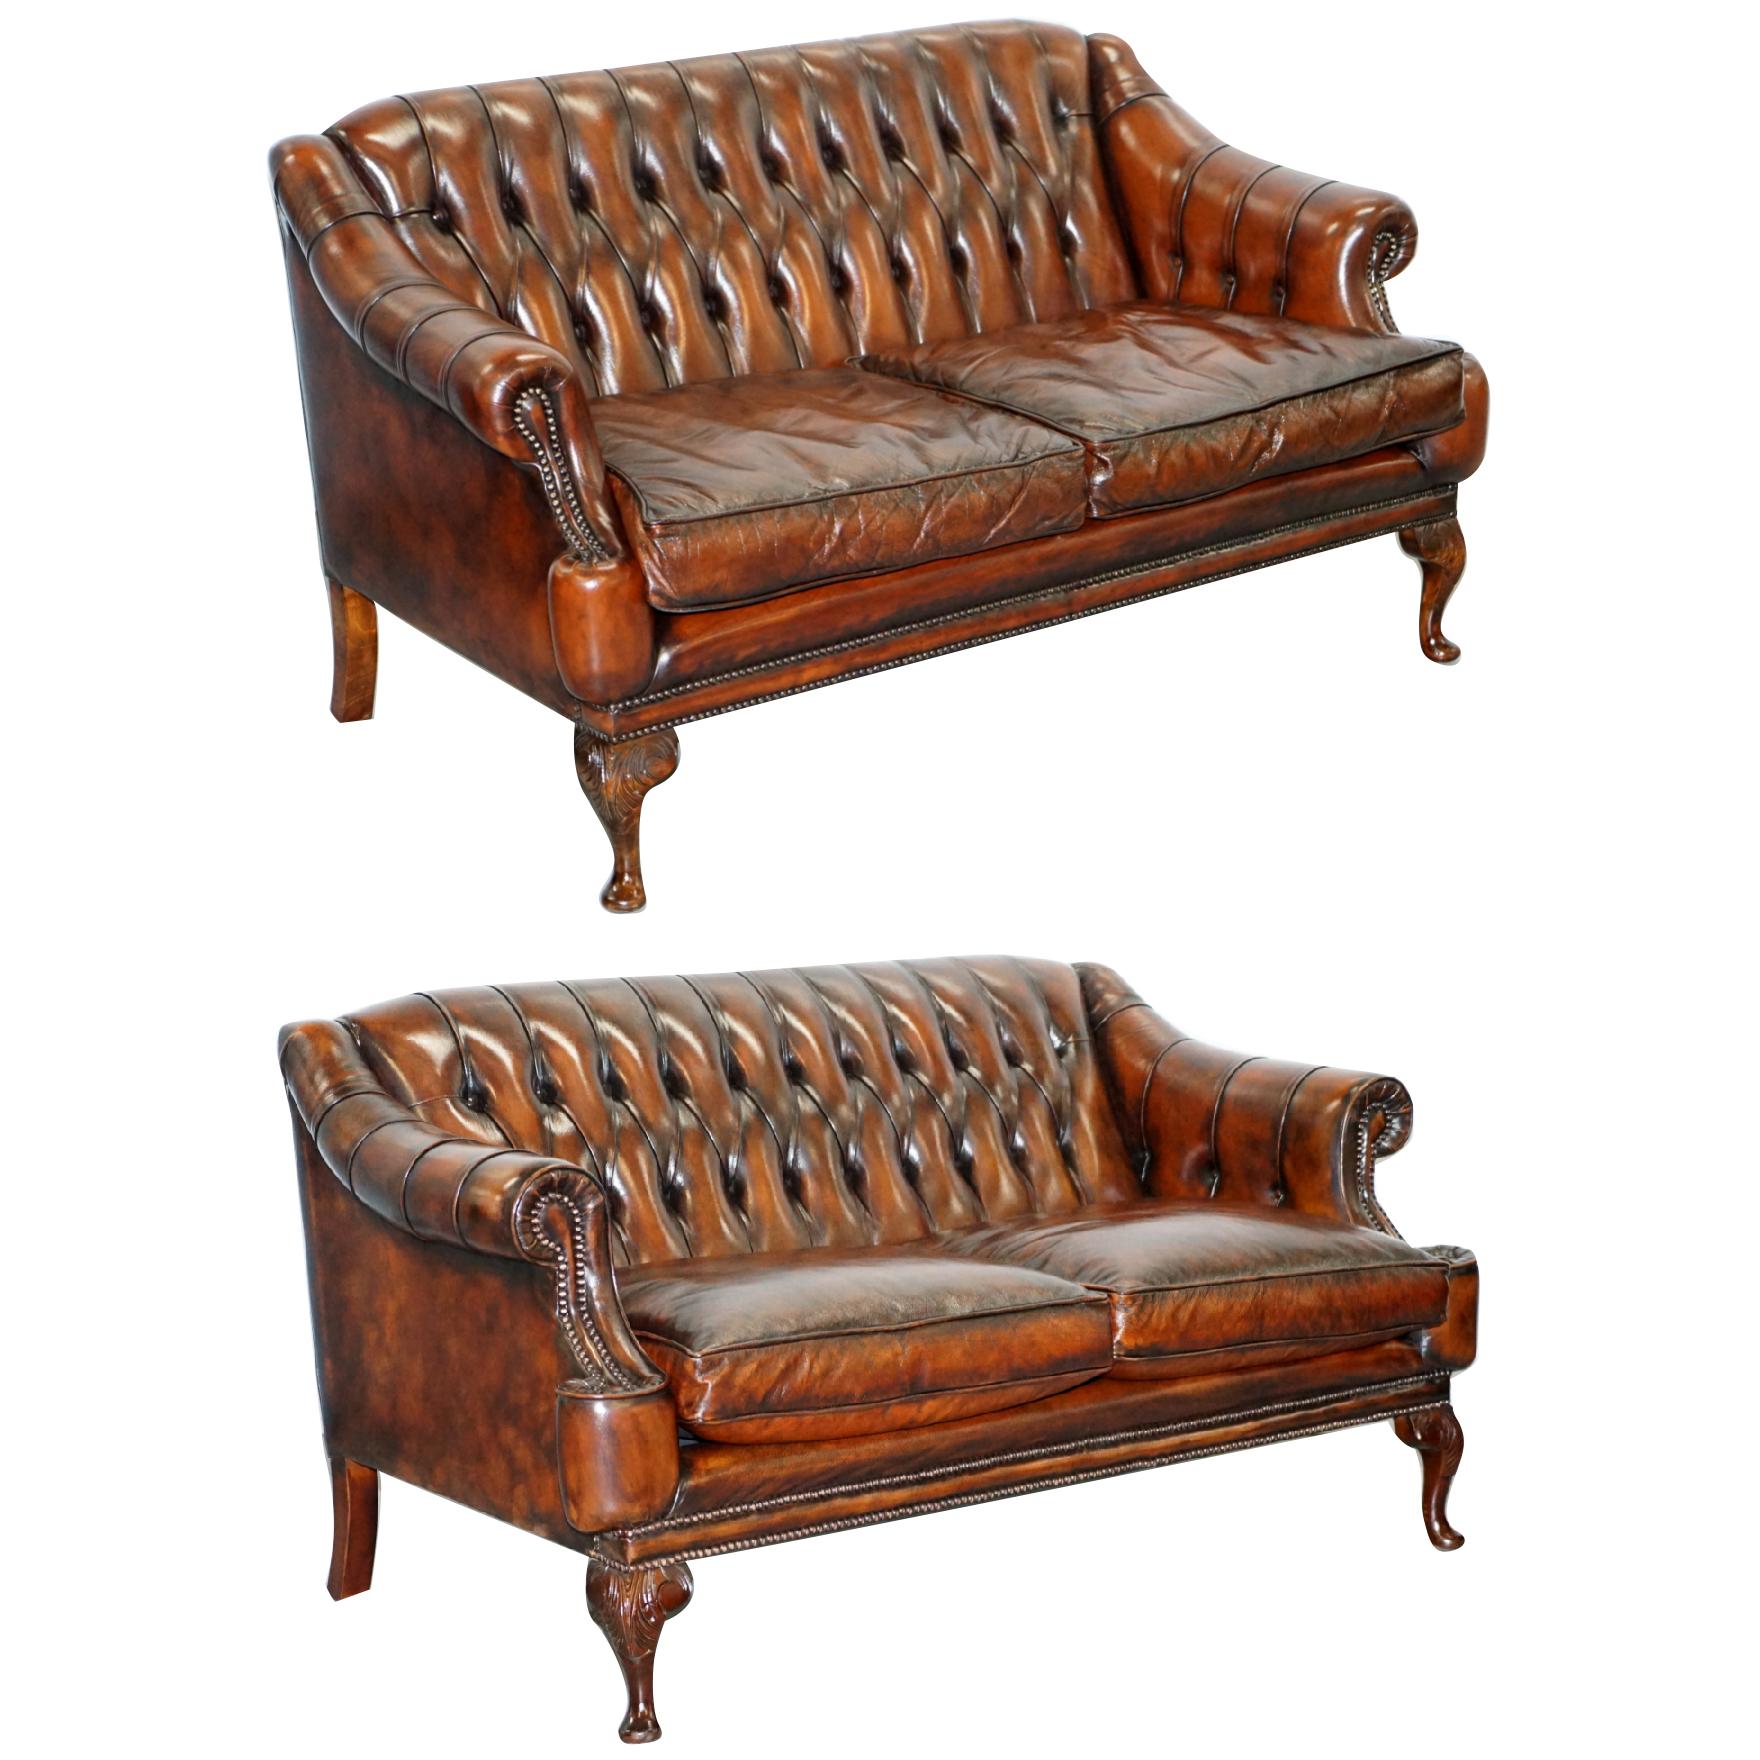 Pair of Restored Lutyen's Style Viceroy's Chesterfield Brown Leather Sofas